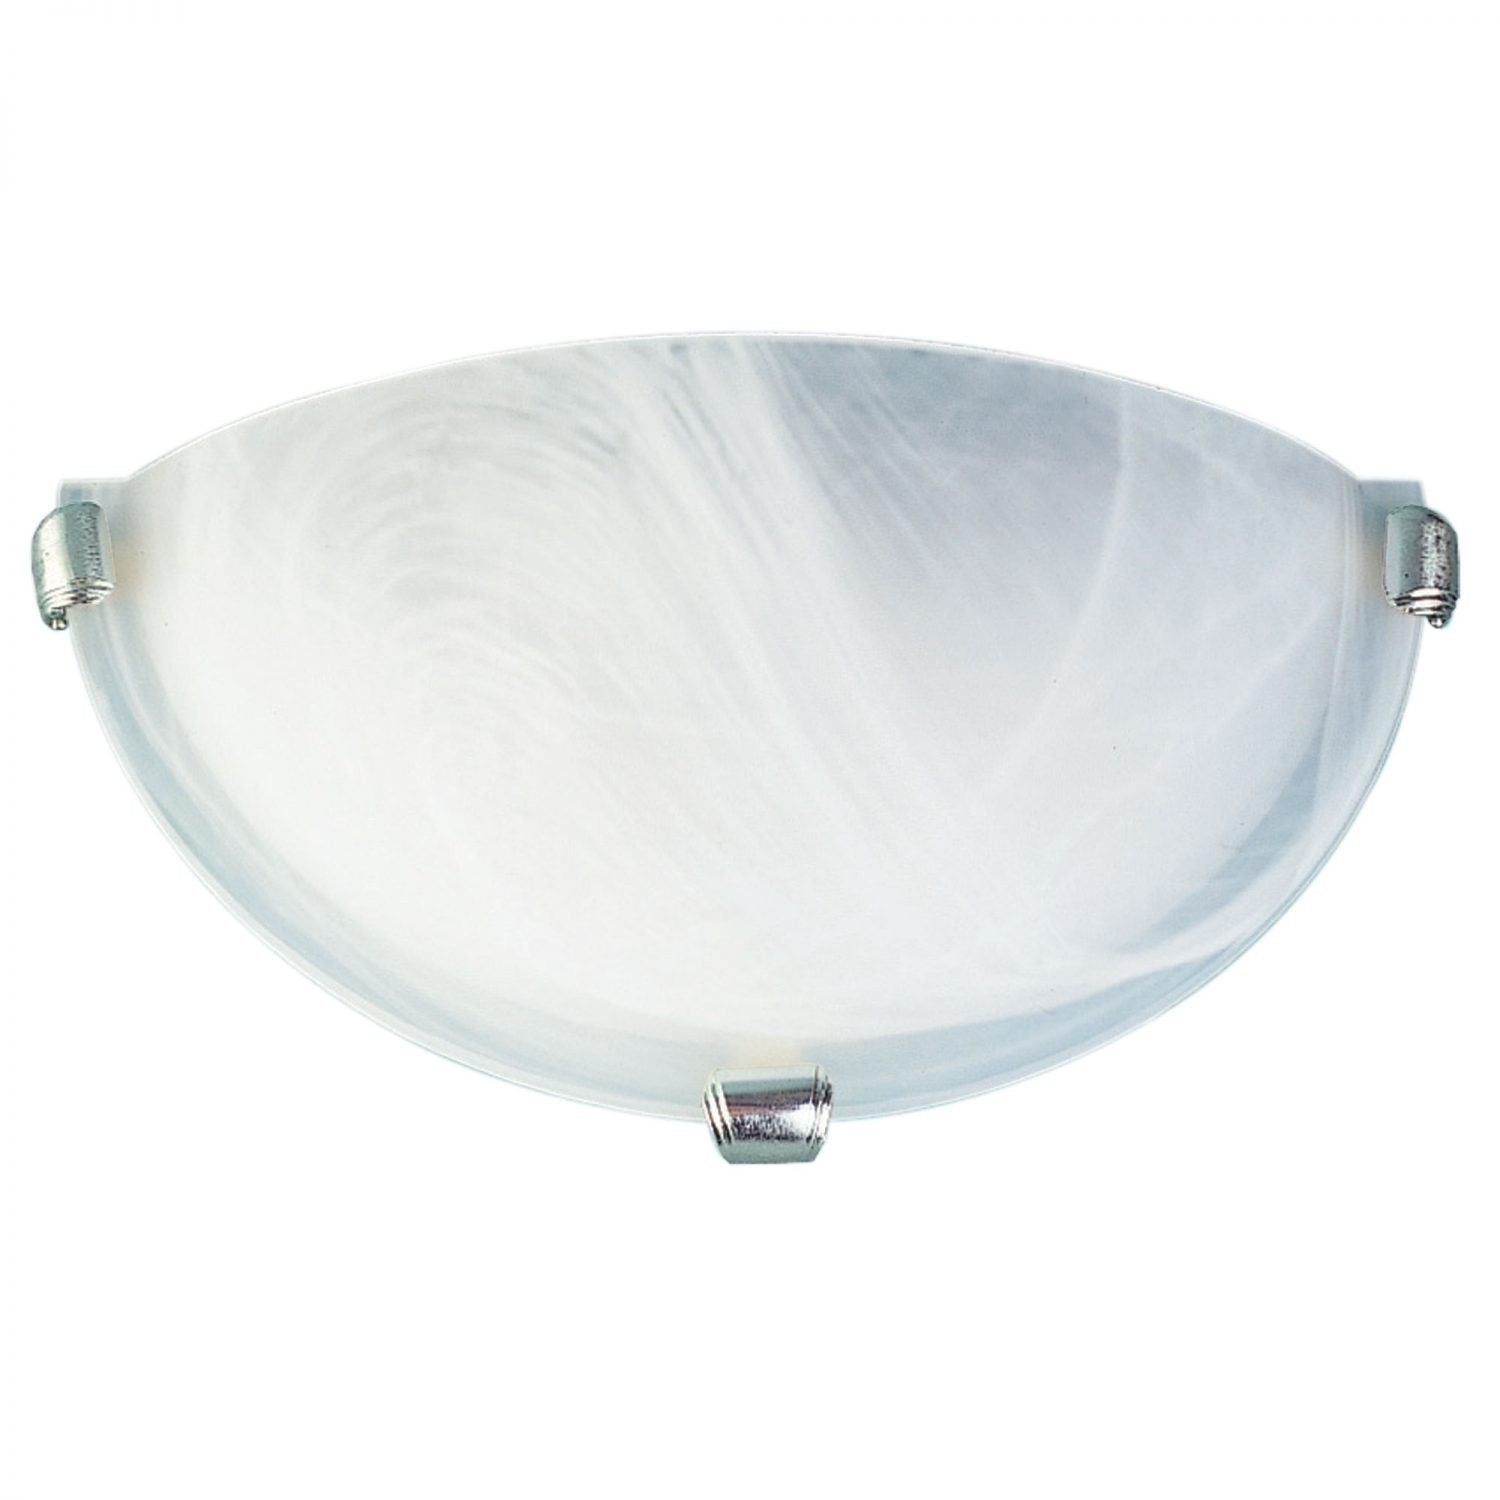 Remo 1 Light Wall Light 300mm Brushed Chrome - OL41340BCH